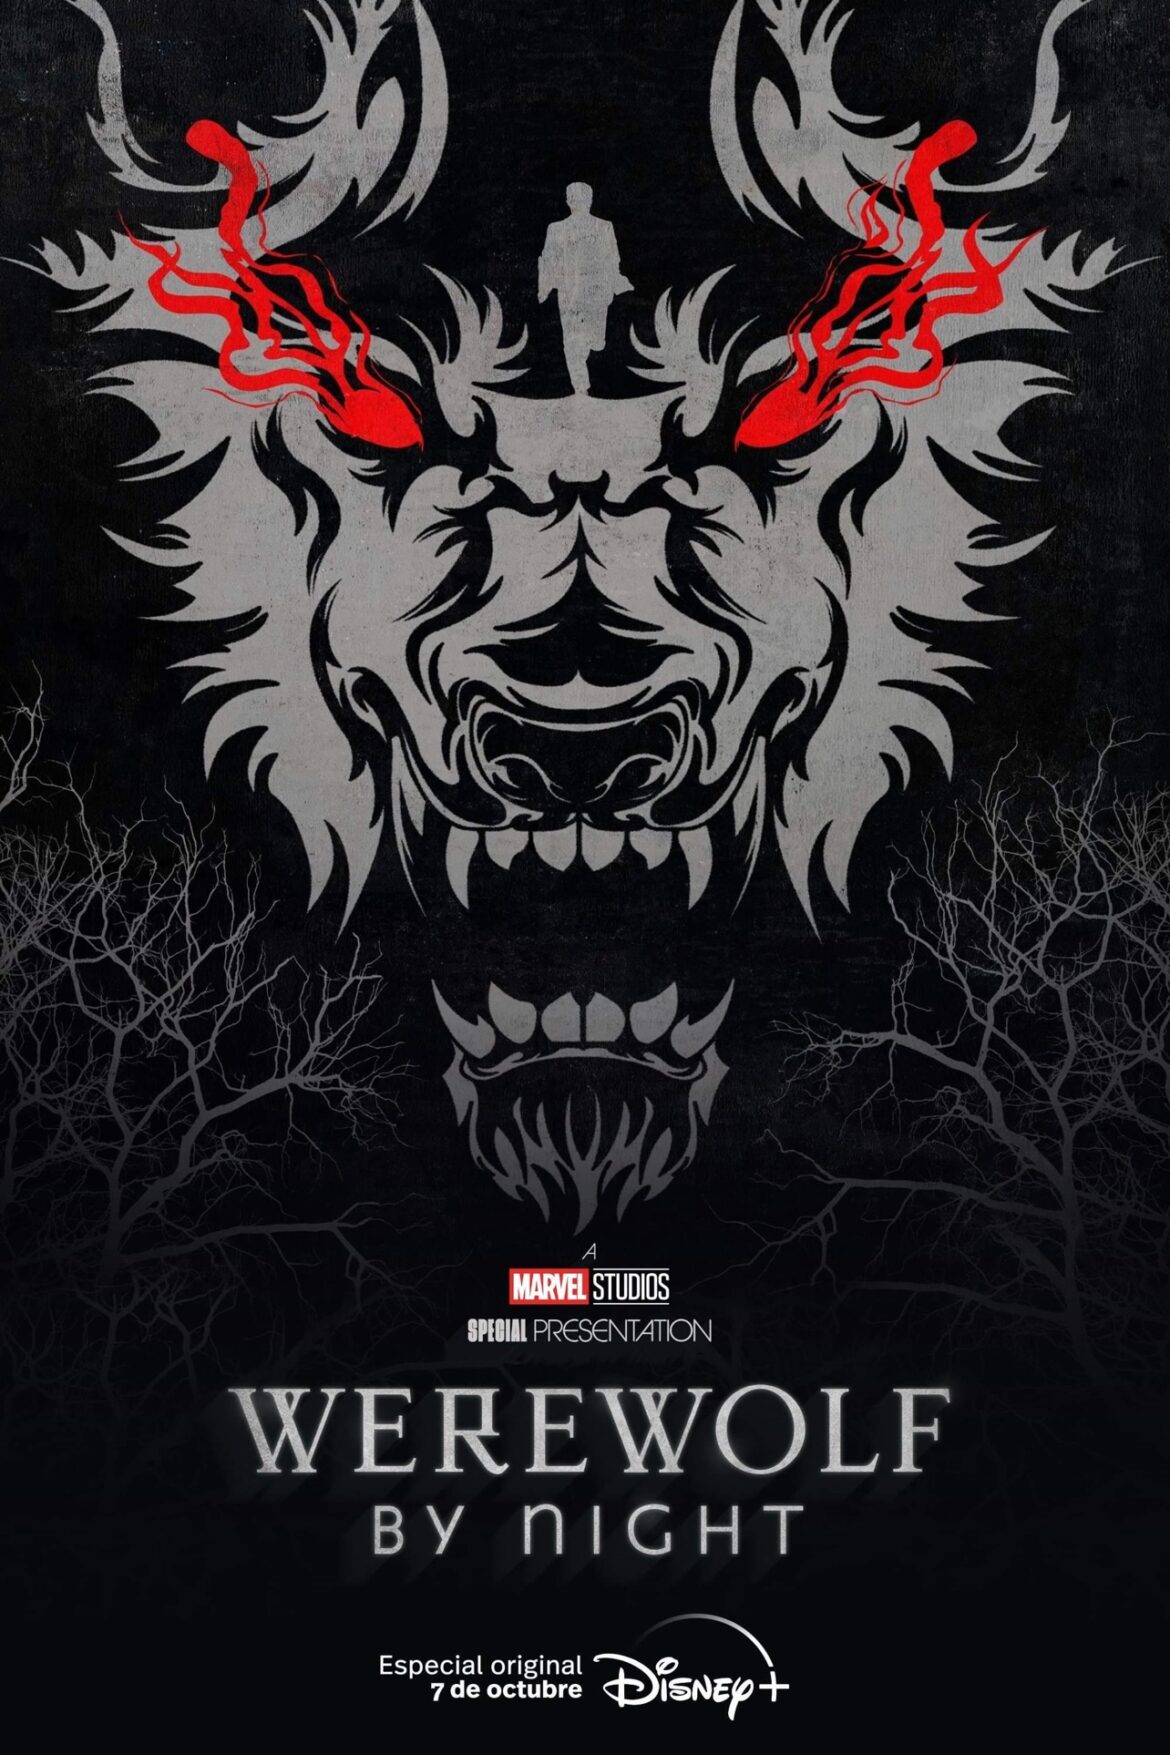 Disney Accused of Plagiarizing Werewolf by Night Poster